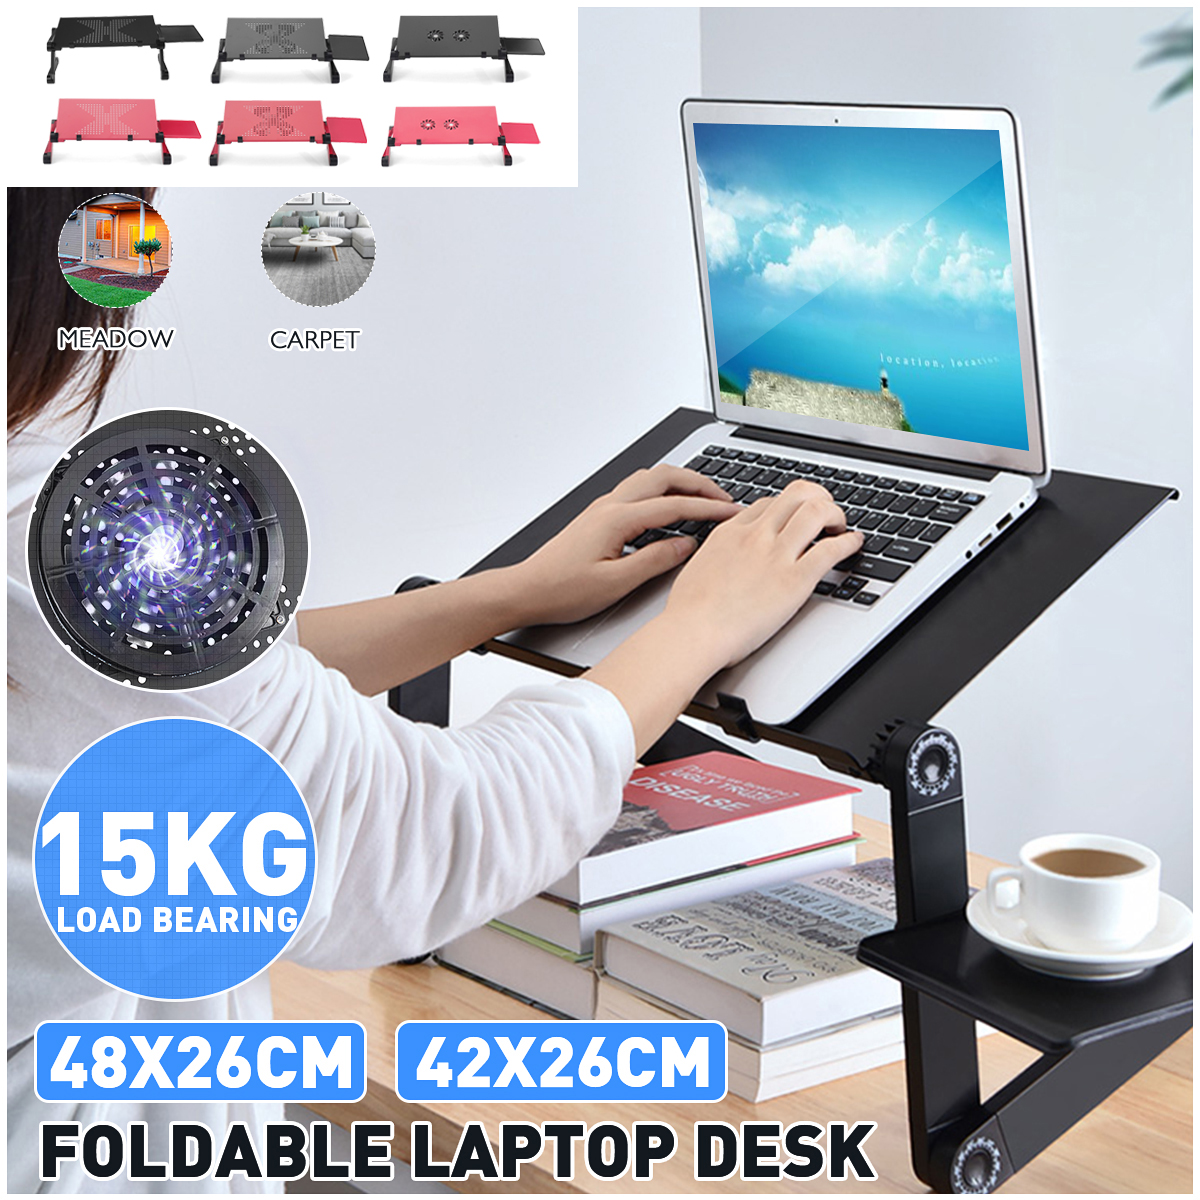 Laptop-Desk-Aluminum-Alloy-Folding-Computer-Notebook-Desk-Bed-Laptop-Table-with-Cooling-Stand-and-Mo-1746373-1